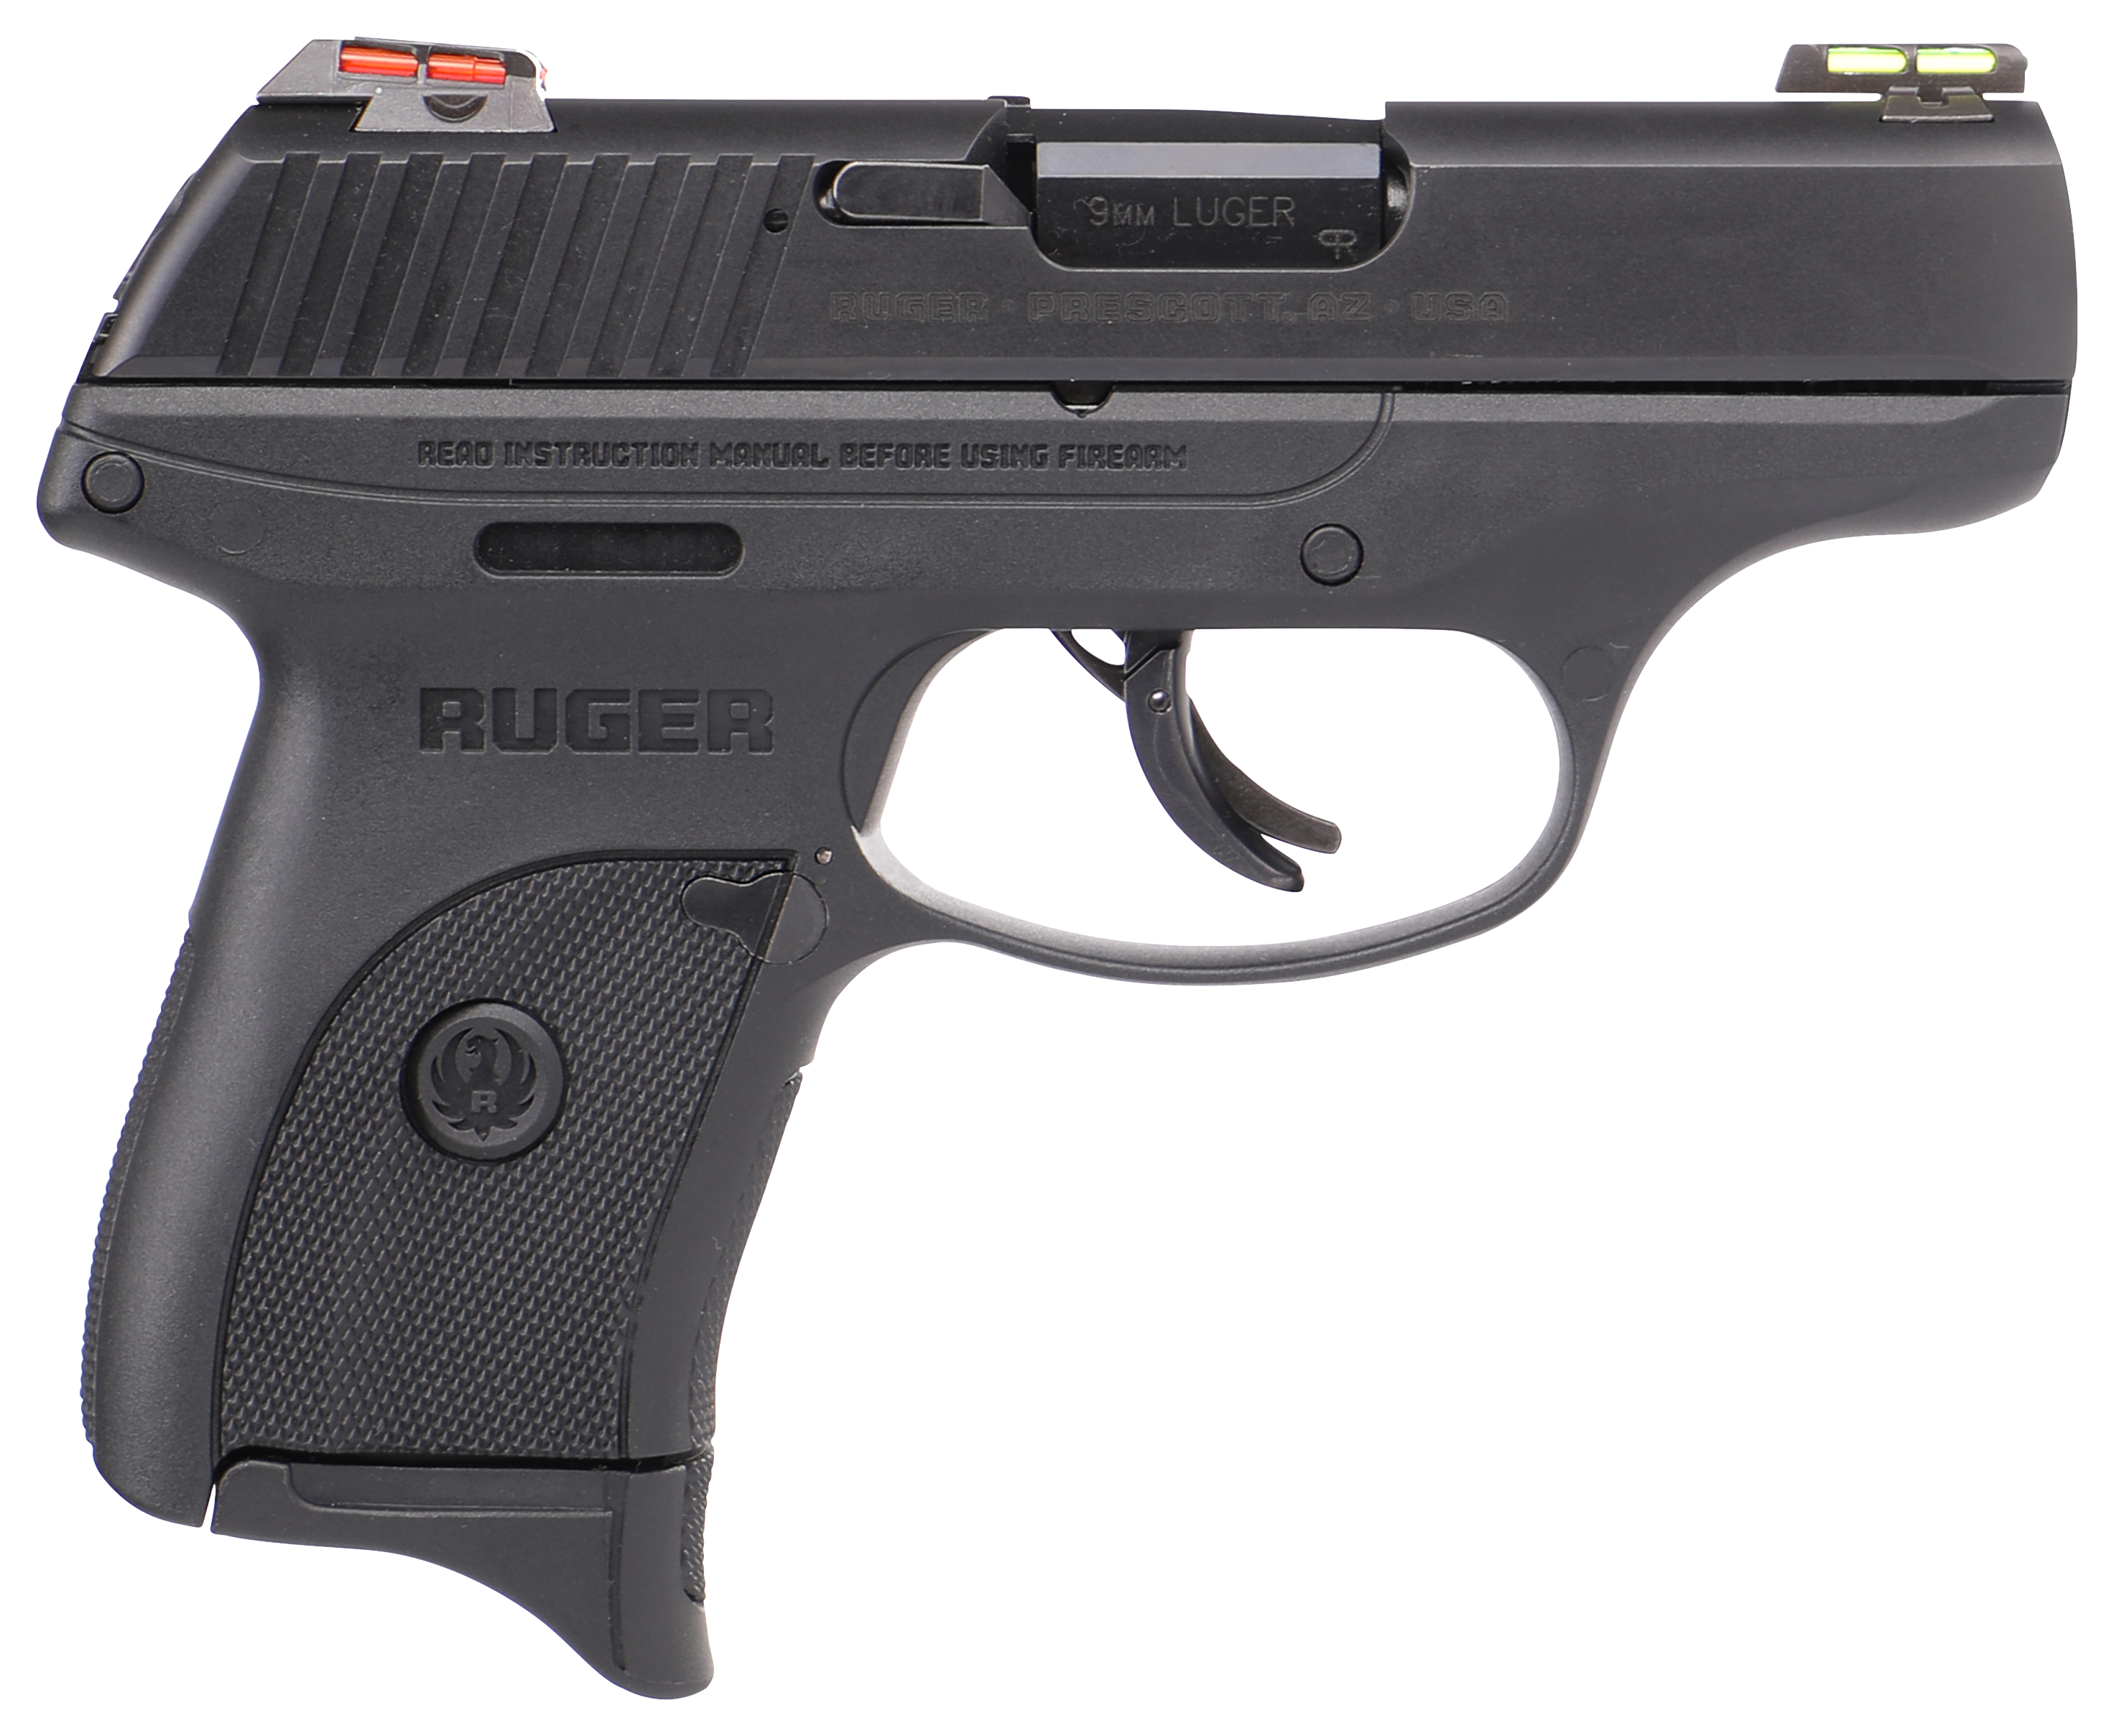 Pistol review: The secret to making a Ruger LCP carry-able is buying the  right accessories